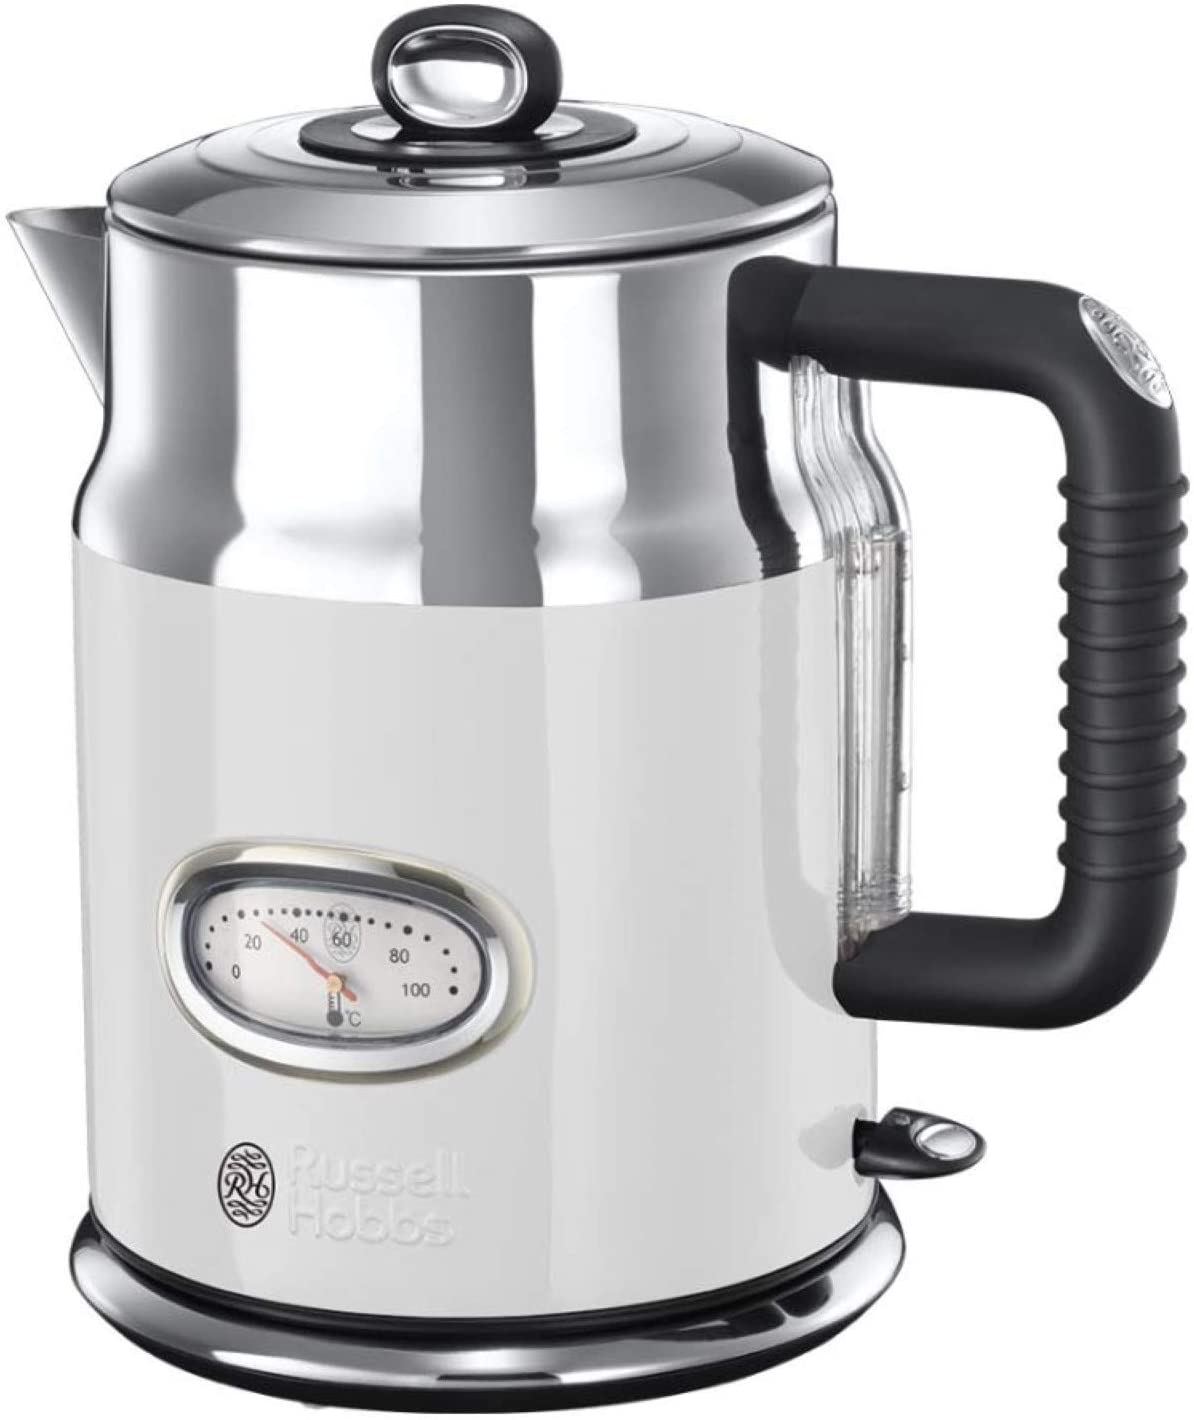 Russell Hobbs Coffee Machine, Retro White - for Up to 10 Cups, 1.25 Litre Glass Pot - Brewing & Warming Indicator - Retro Design